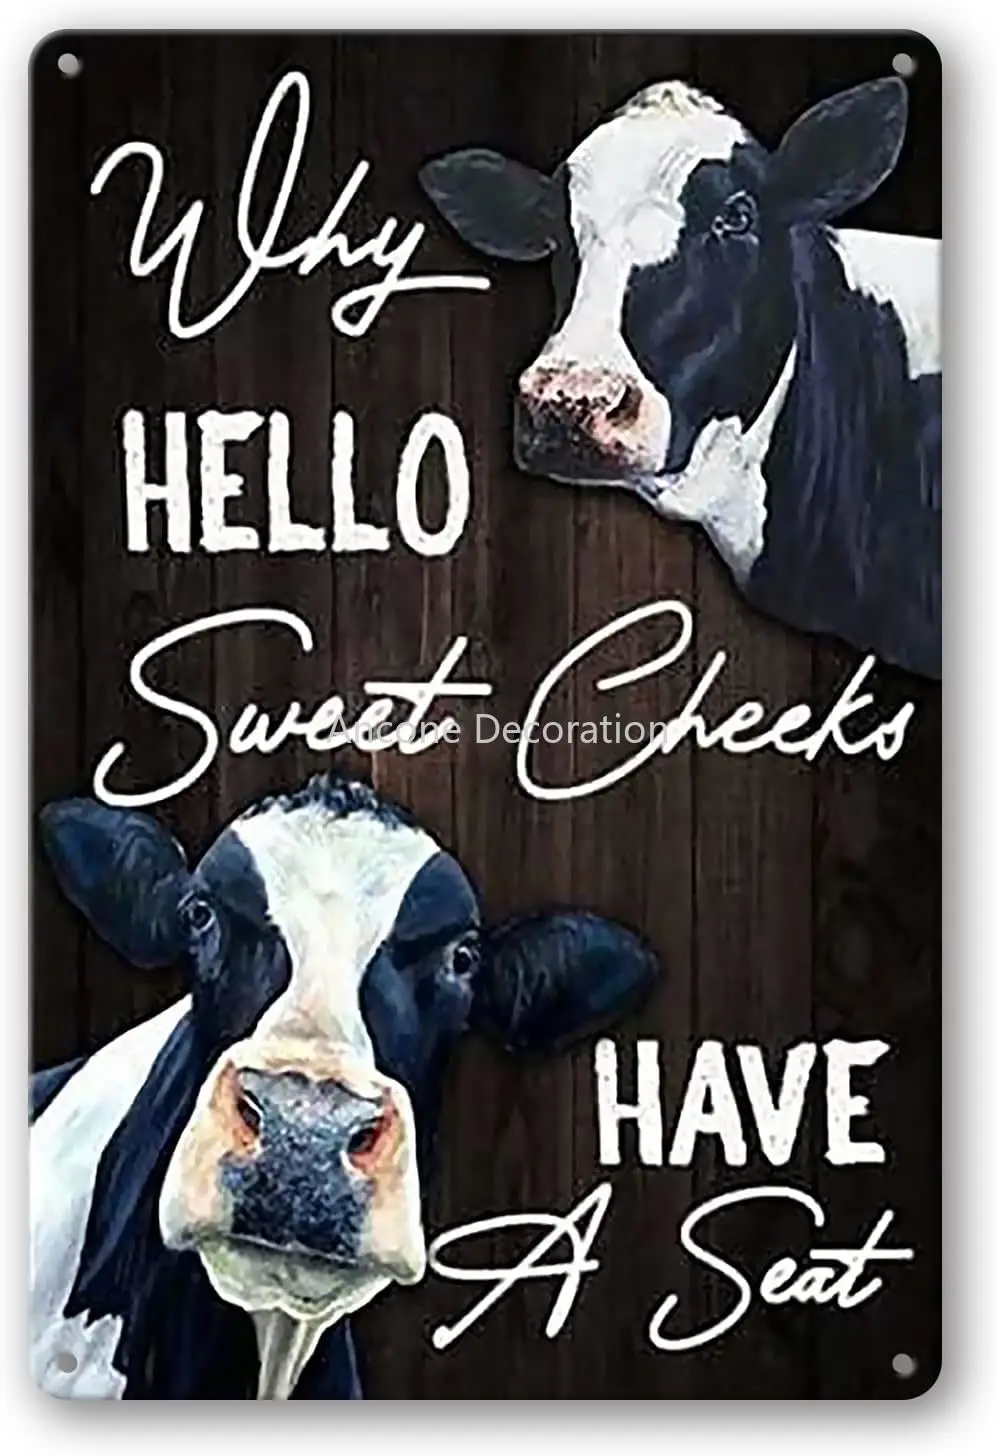 

Cow Why Hello Sweet Cheeks Have a Seat, Vintage Retro Metal Tin Sign Home Bar Kitchen Farmhouse Home Decor Signs Gifts 8